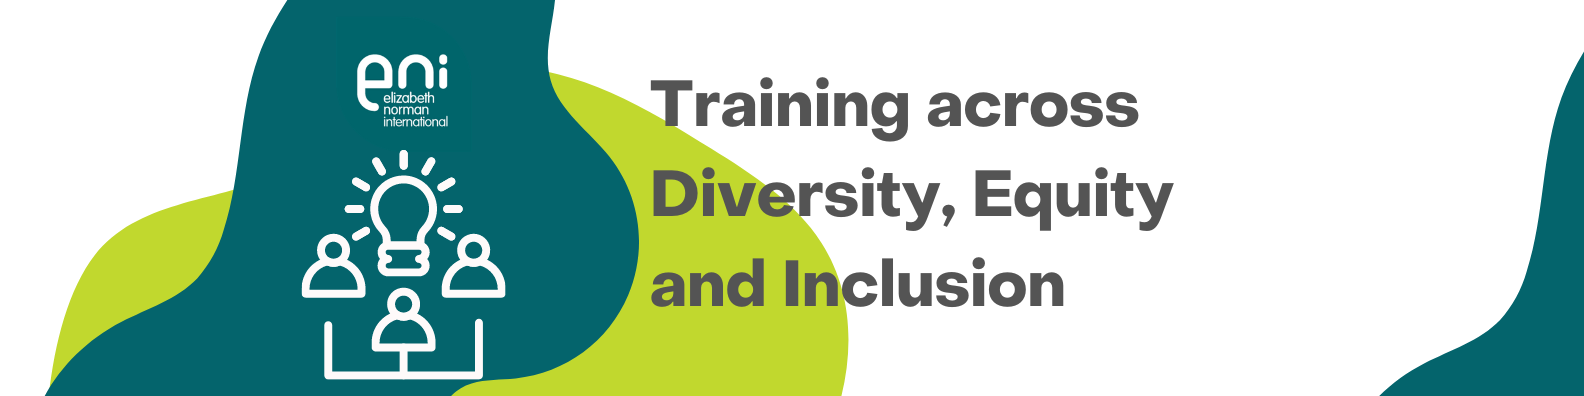 10 things to consider when training on Diversity, Equity and Inclusion featured image